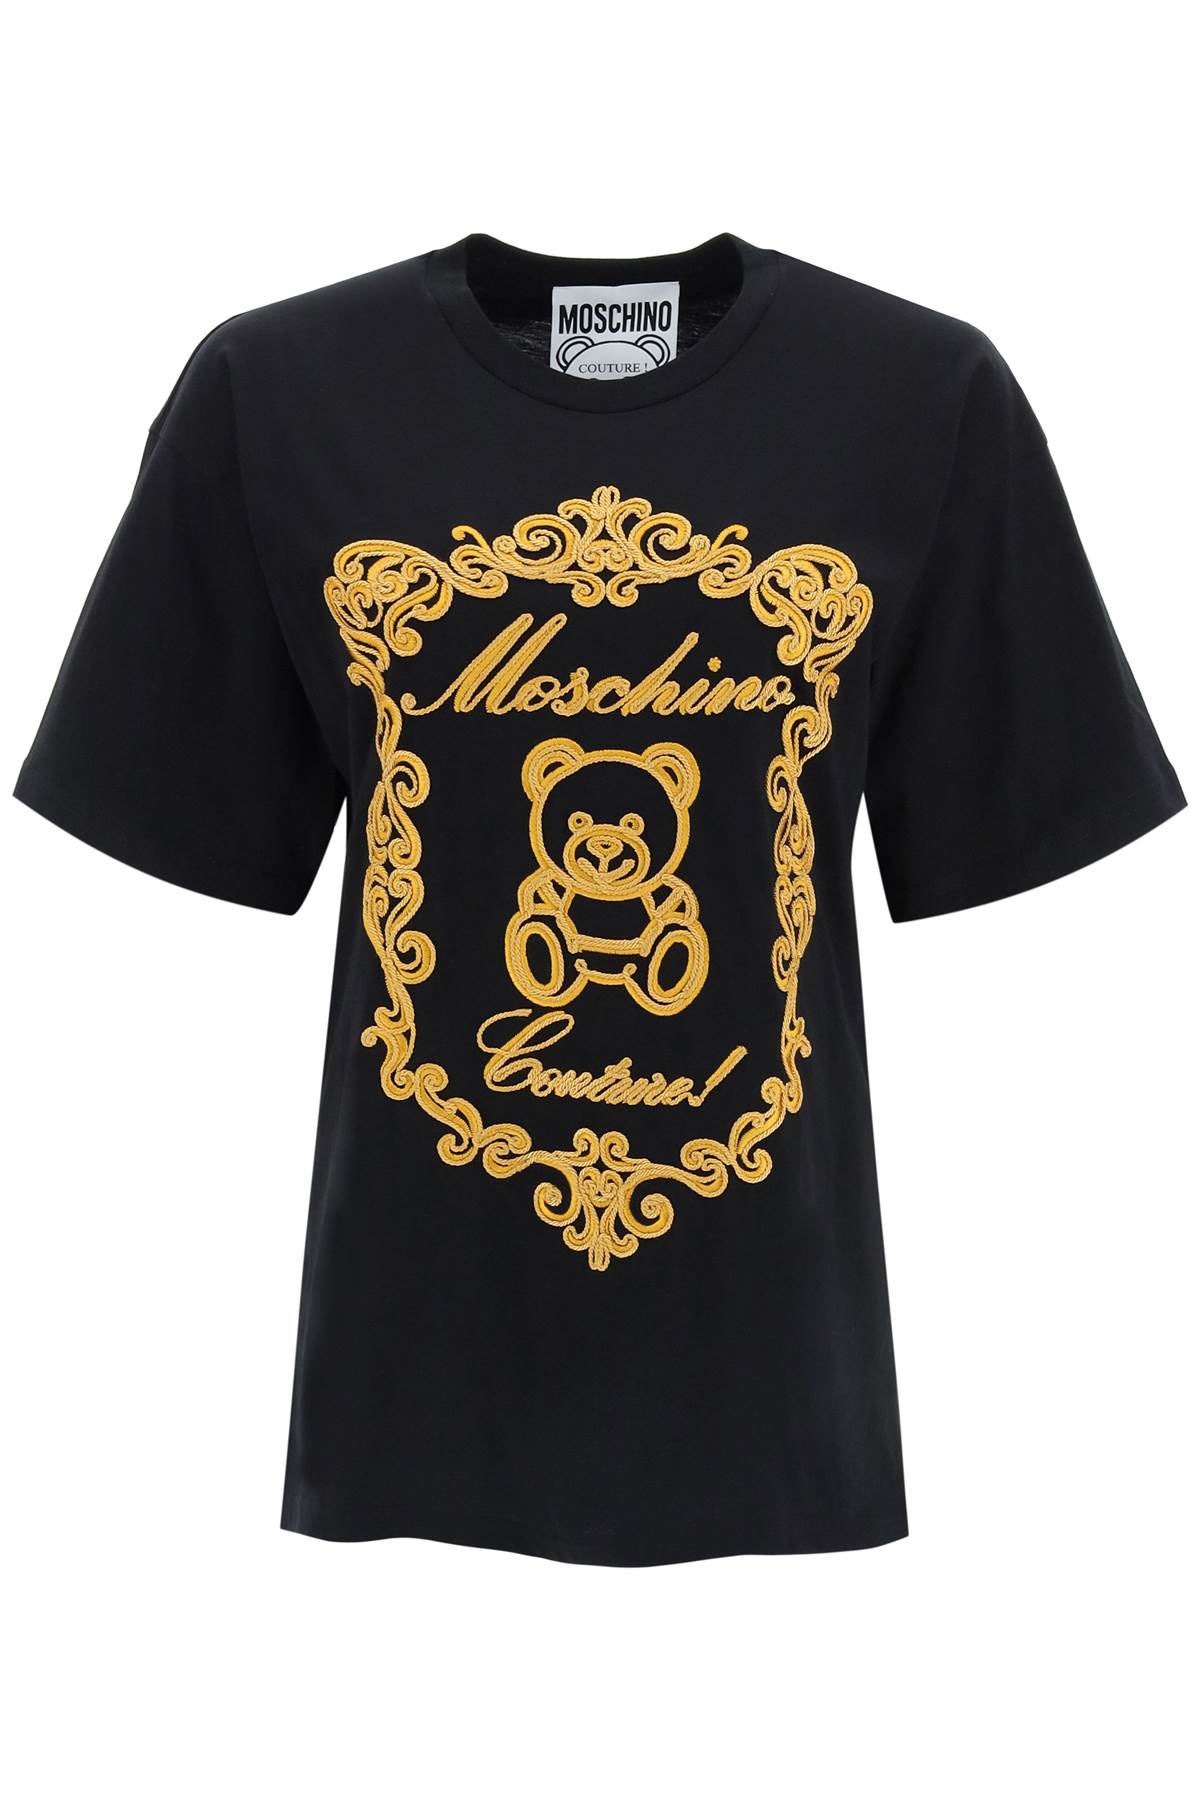 Moschino Oversized T-shirt With Teddy Bear Embroidery